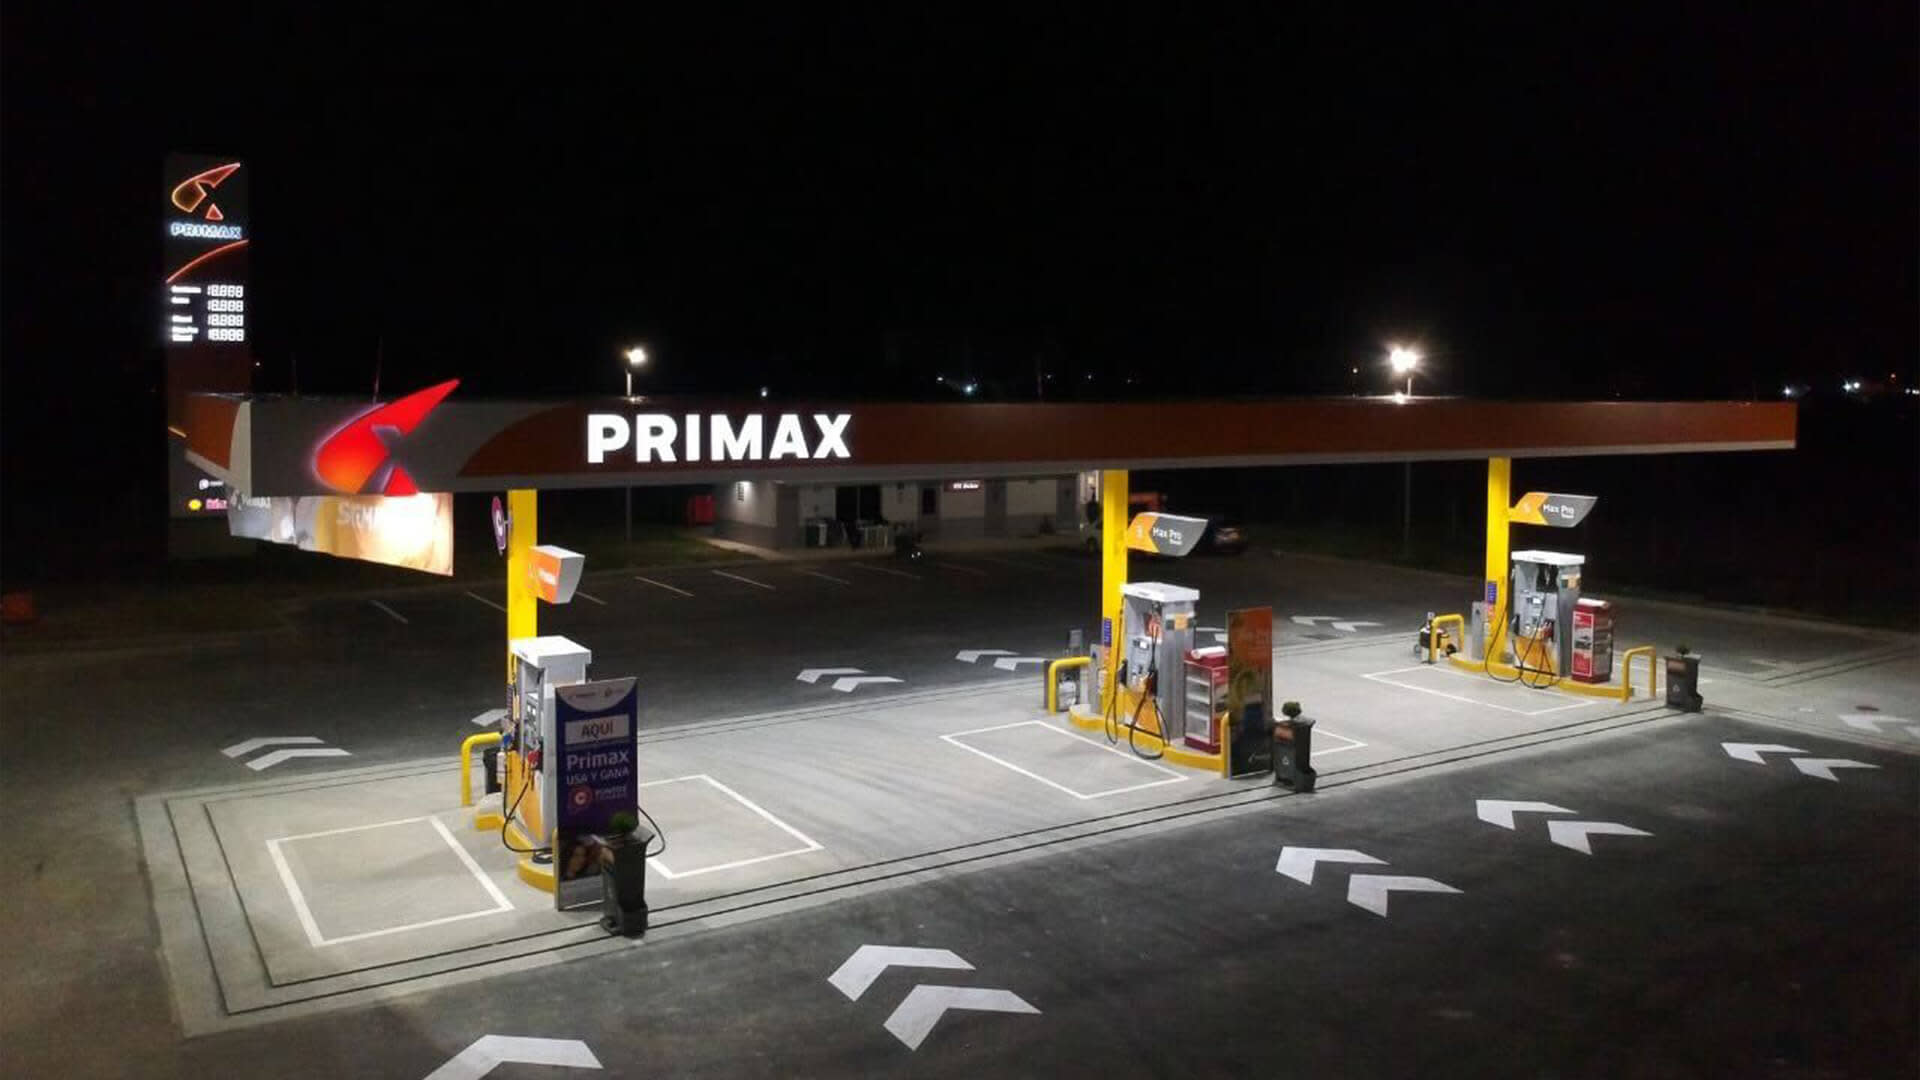 Primax gas station at night